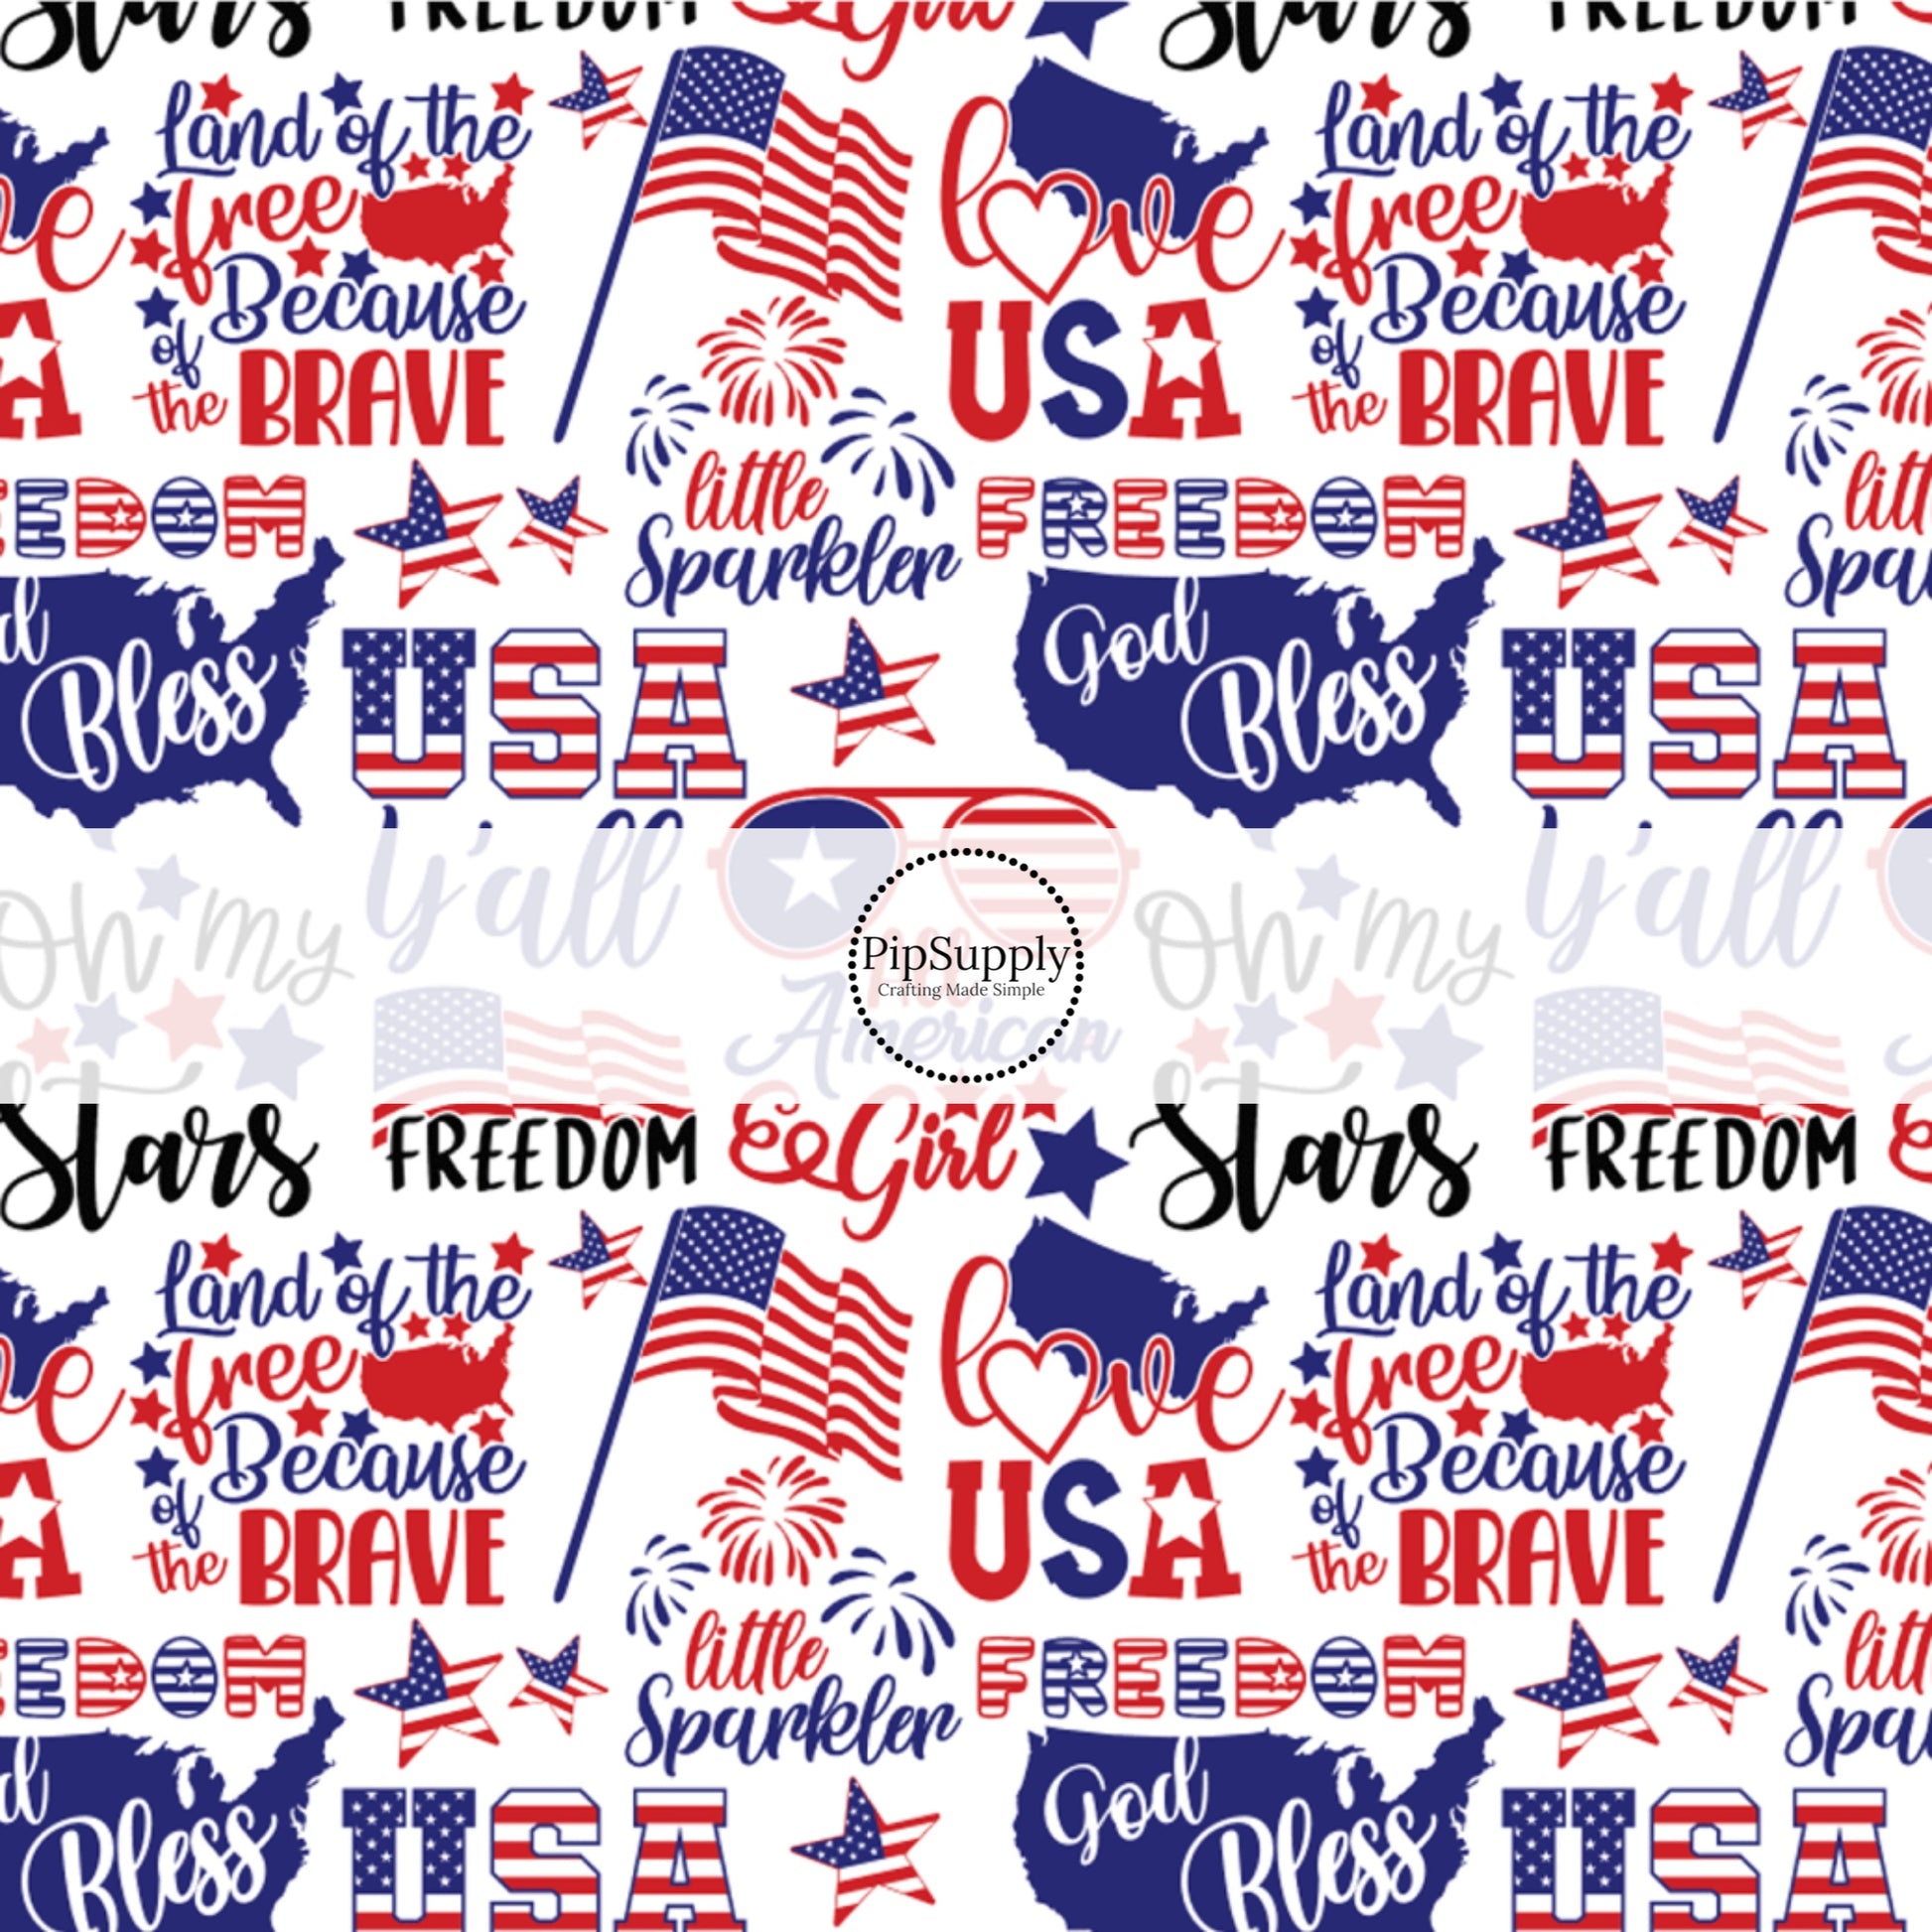 Stars and stripes, fireworks, sayings, and flags on white bow strips